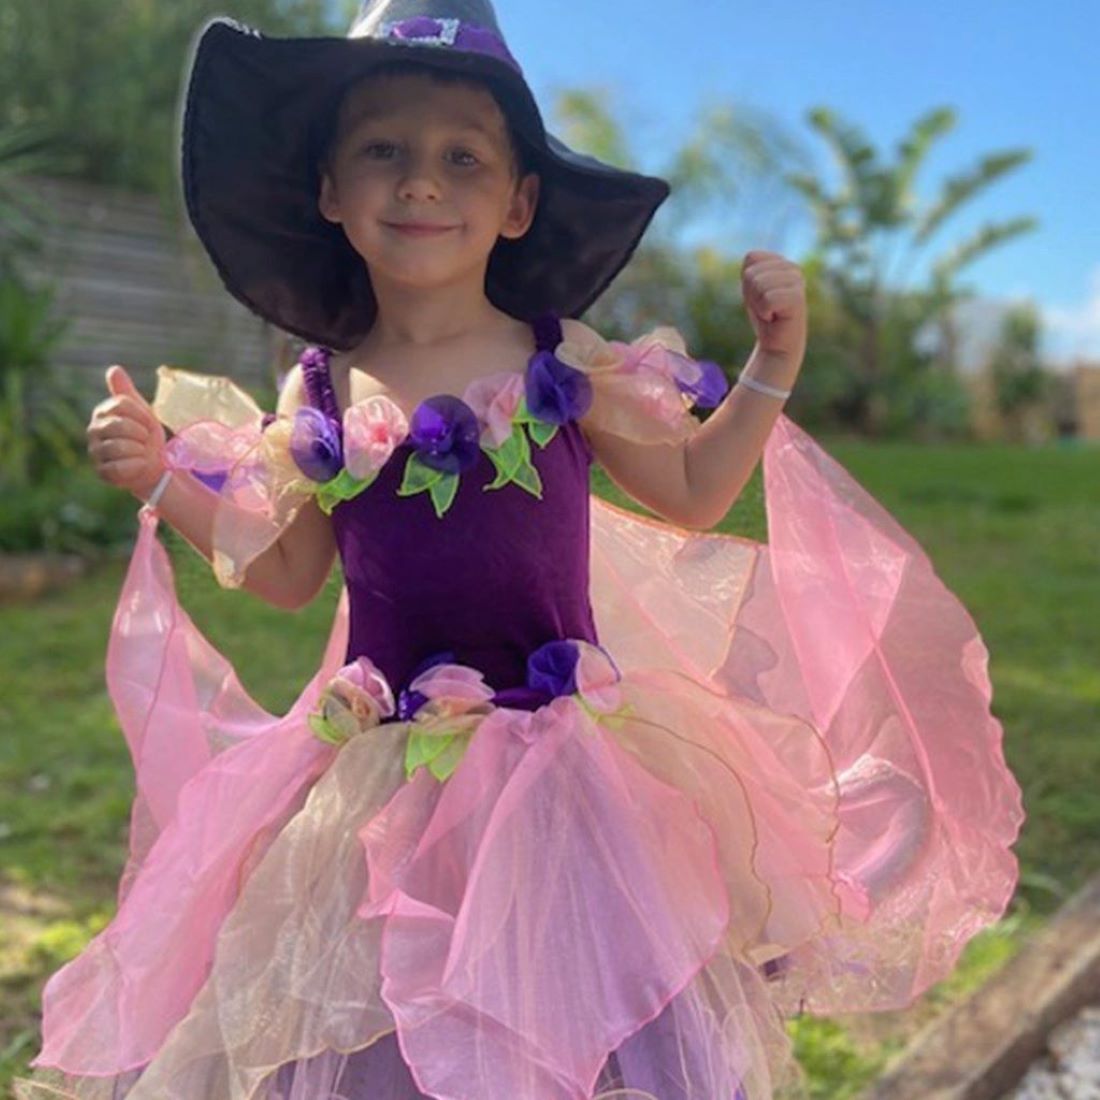 Handmade Fairy Flower Girls Dresses For Wedding Tutu Princess Kids Ball Gown  Baby Pageant Party Gowns Clothes255z From Angelao, $85.43 | DHgate.Com